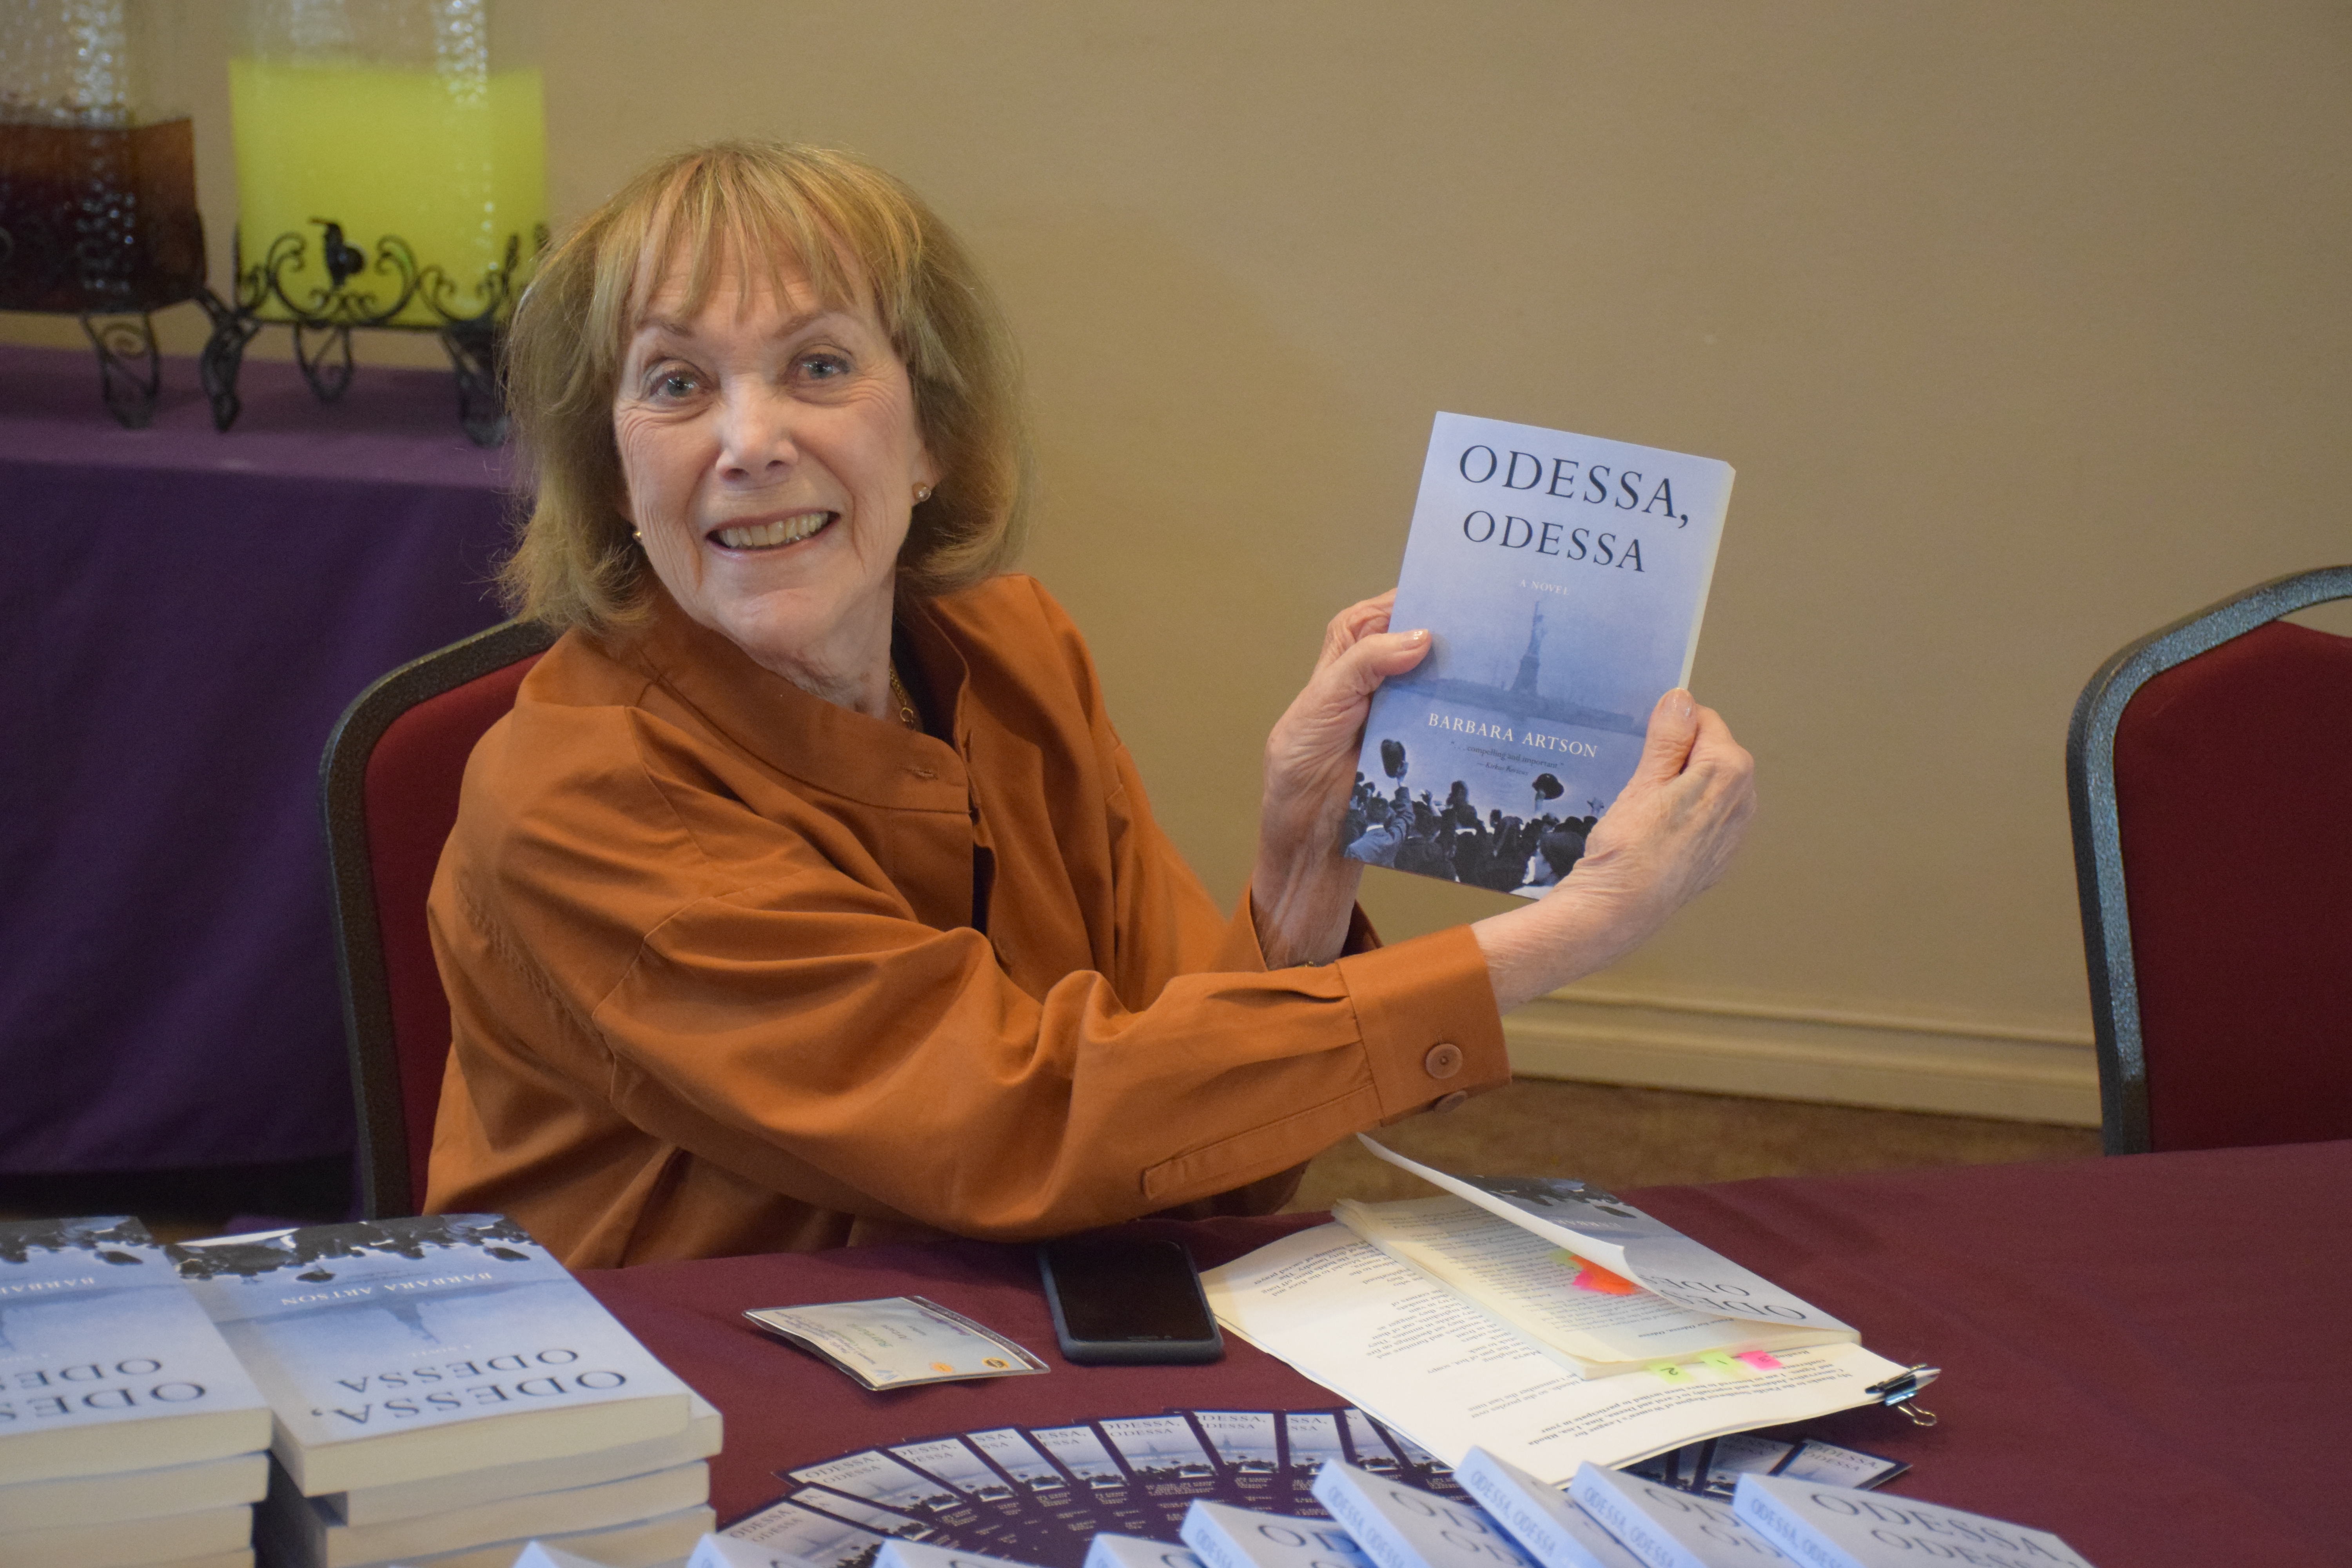 Rabbi Artson's mother selling her new book